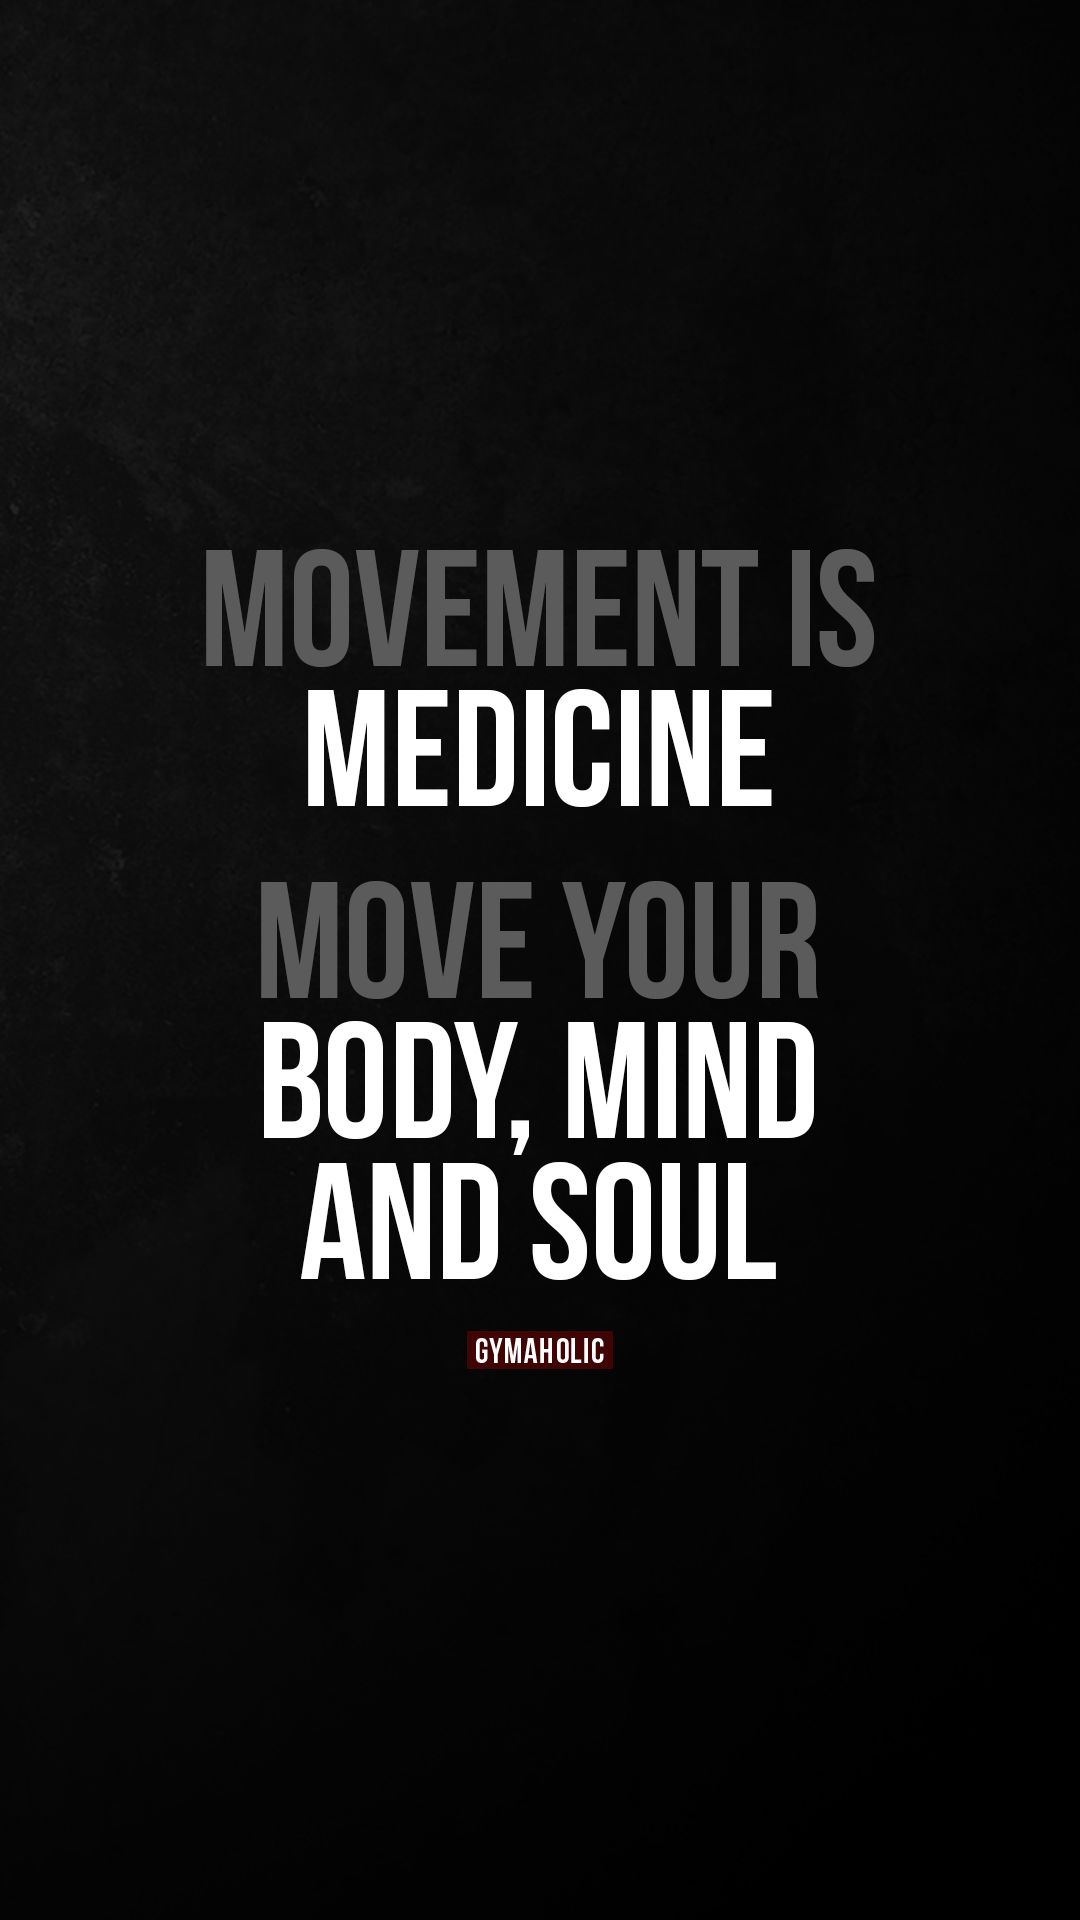 Movement is medicine. Move your body, mind and soul.